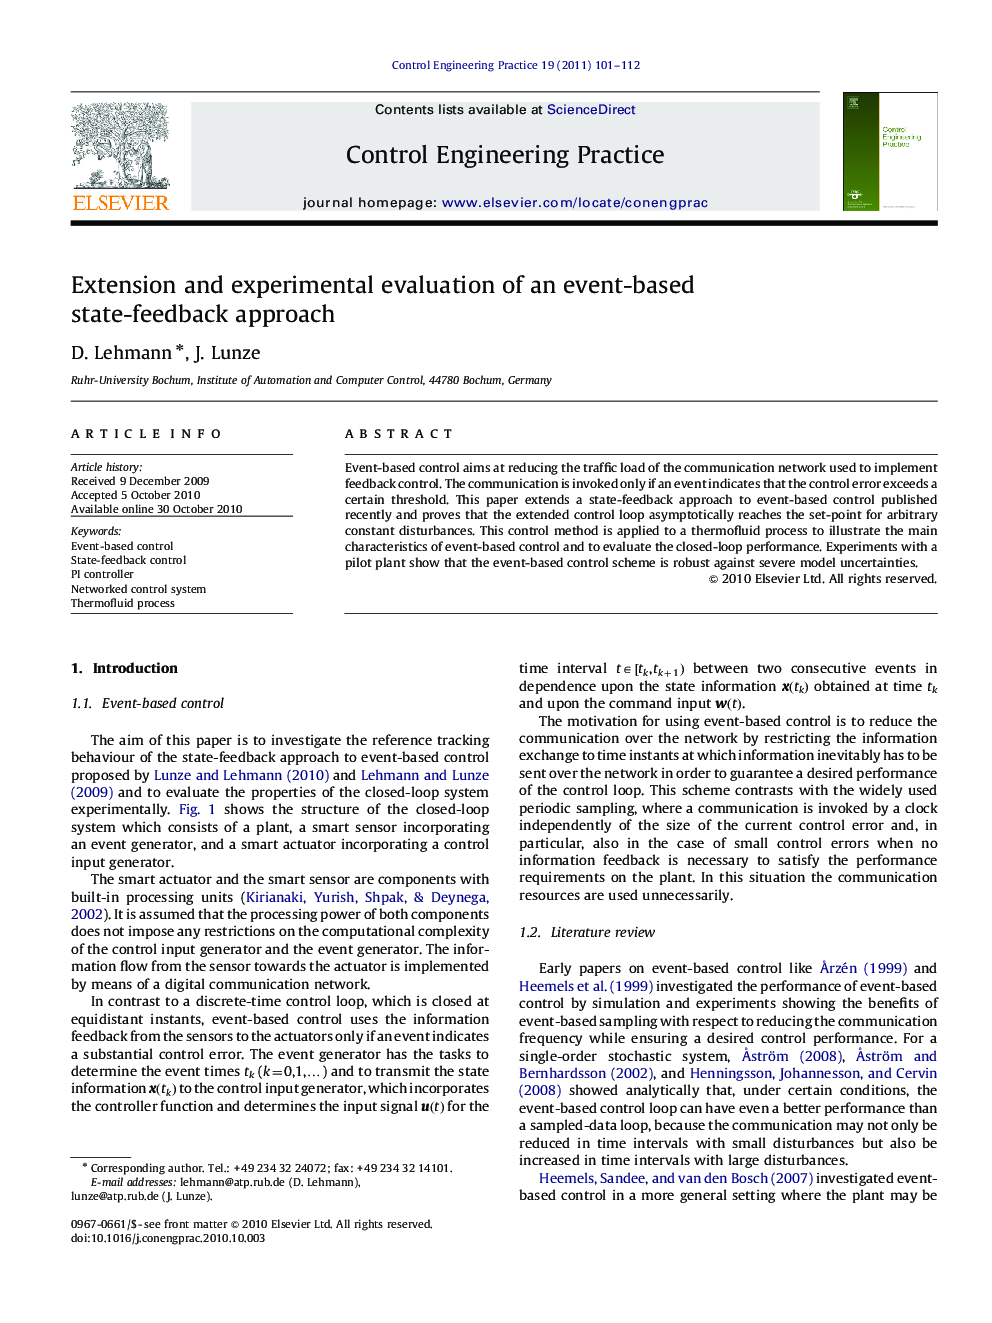 Extension and experimental evaluation of an event-based state-feedback approach